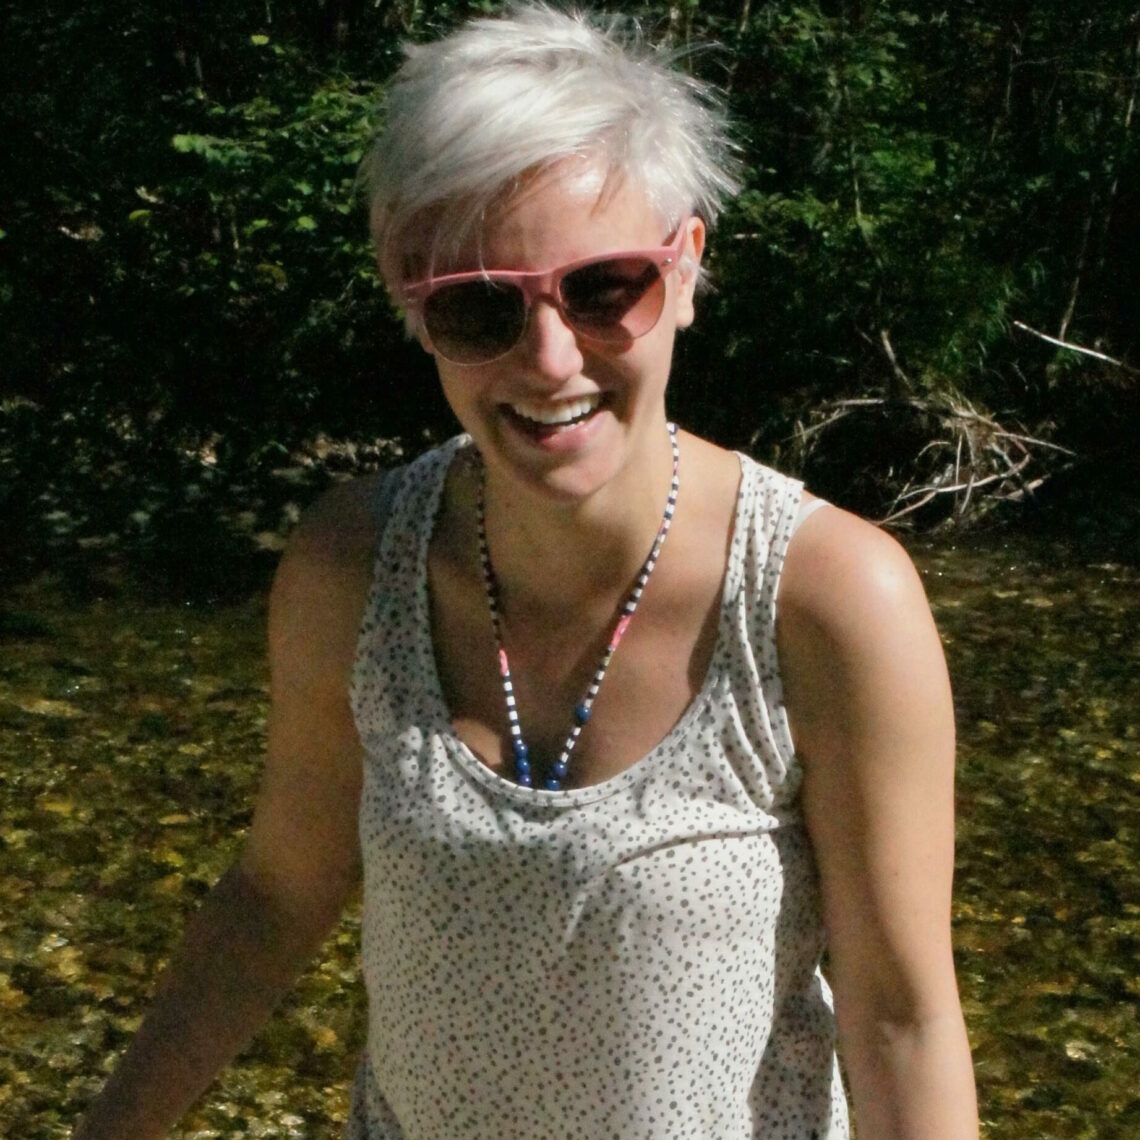 A woman wearing sunglasses posing for the camera